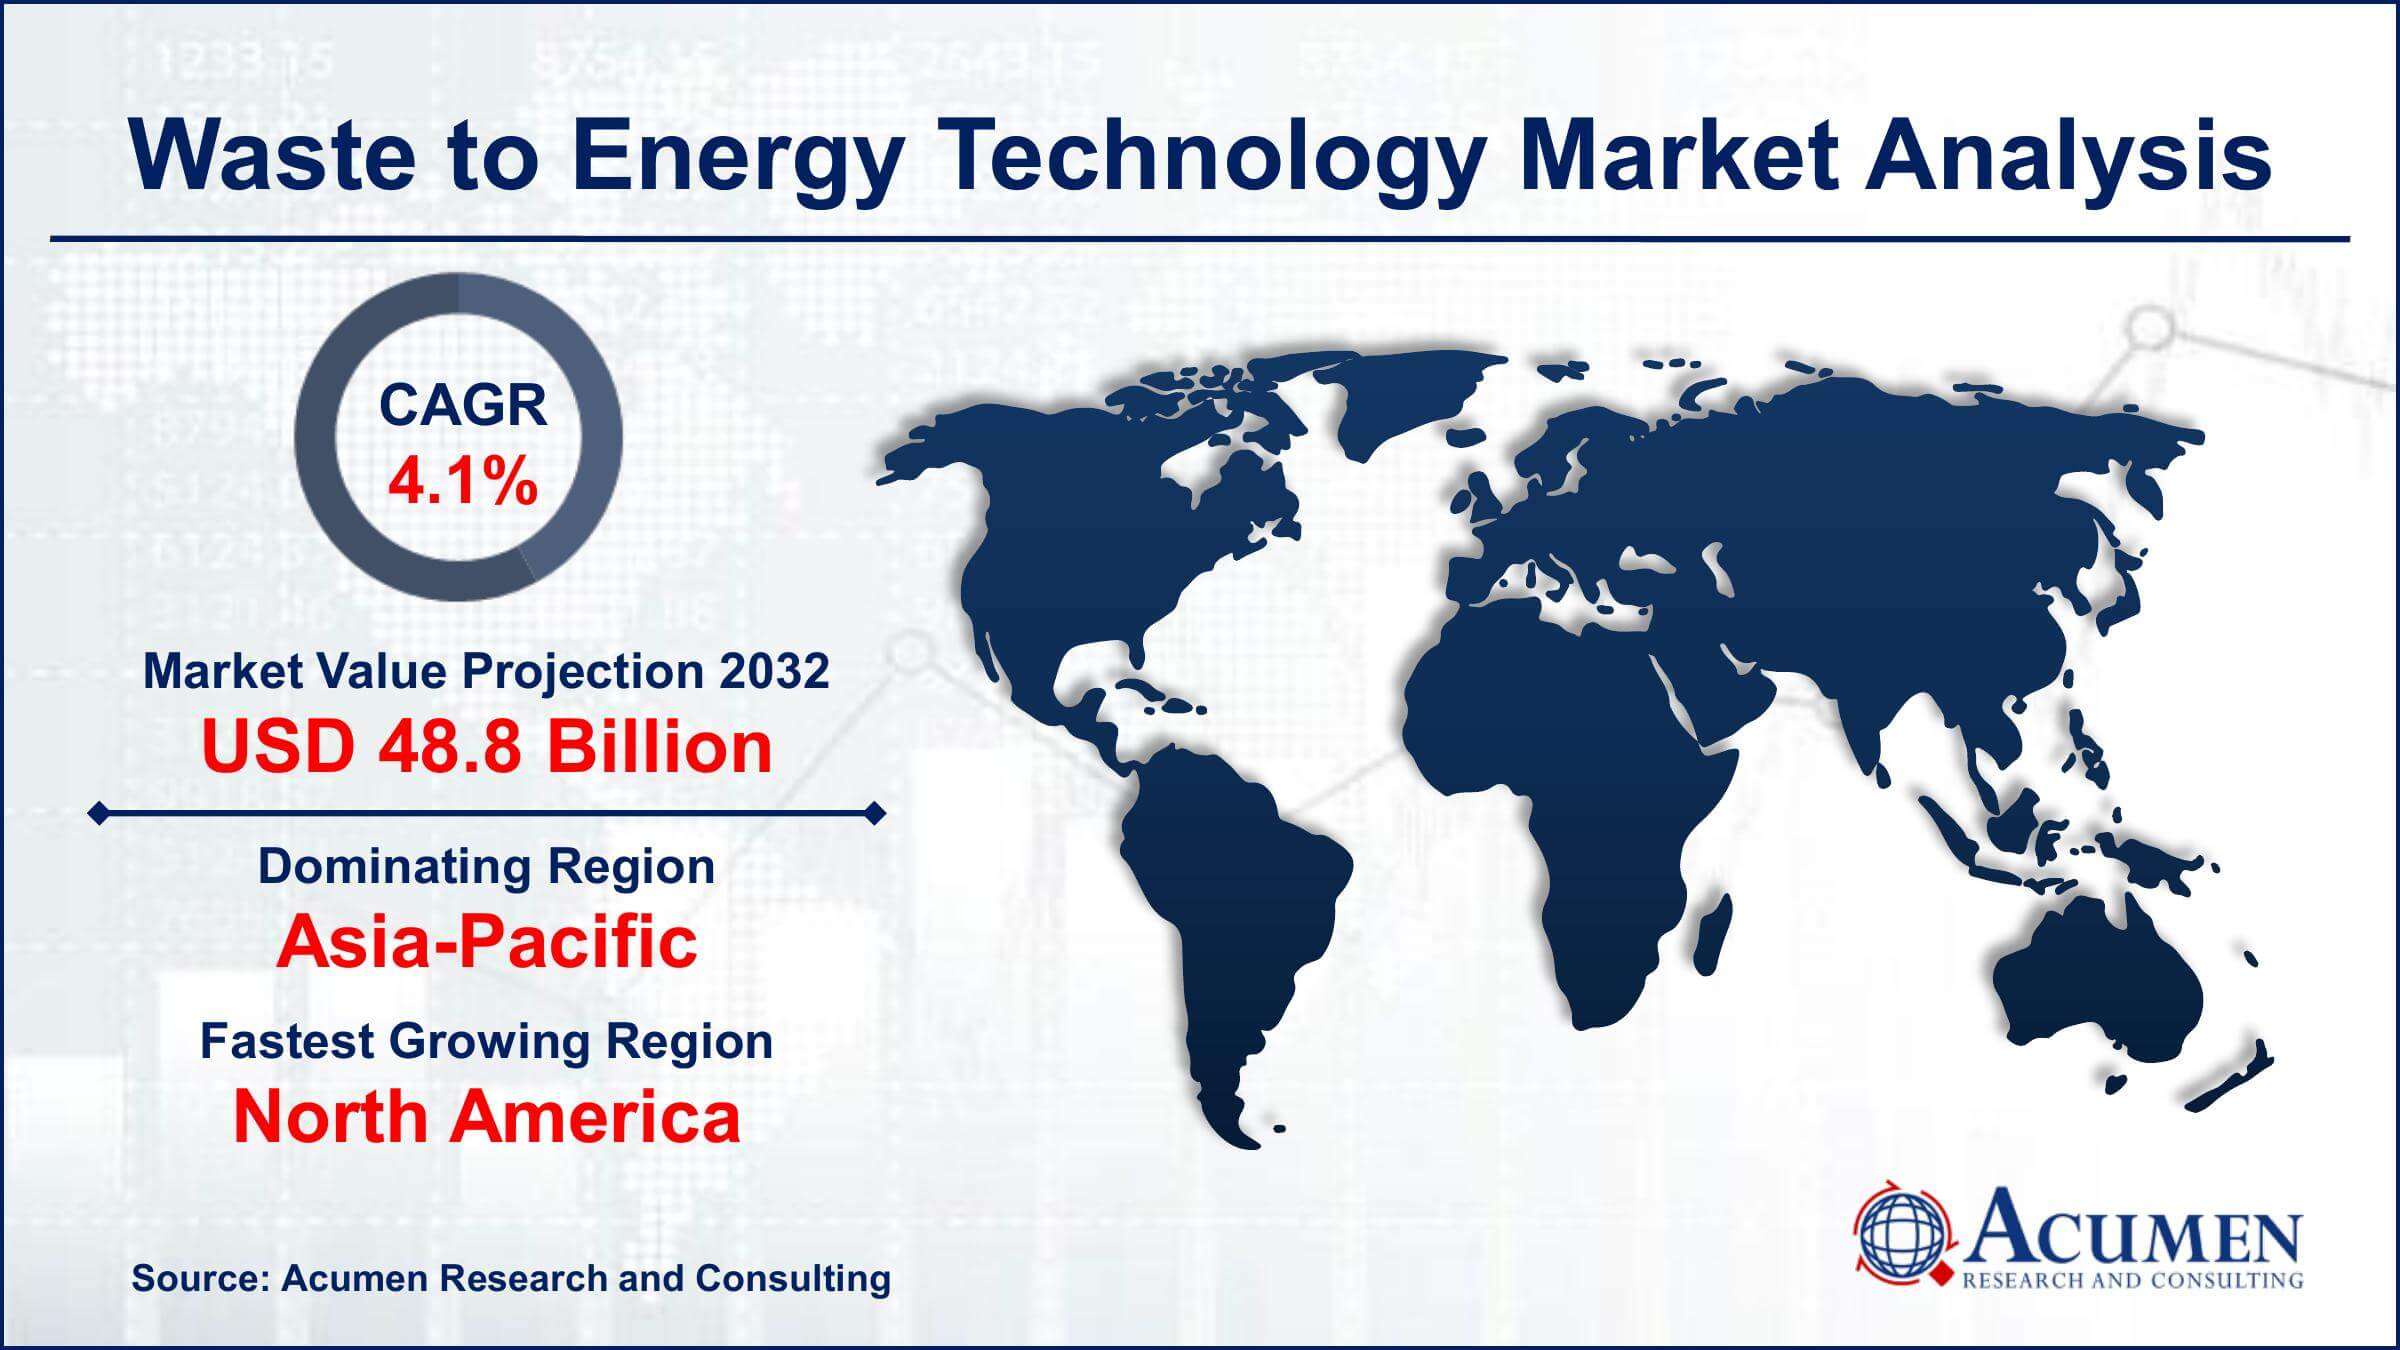 Global Waste to Energy Technology Market Trends